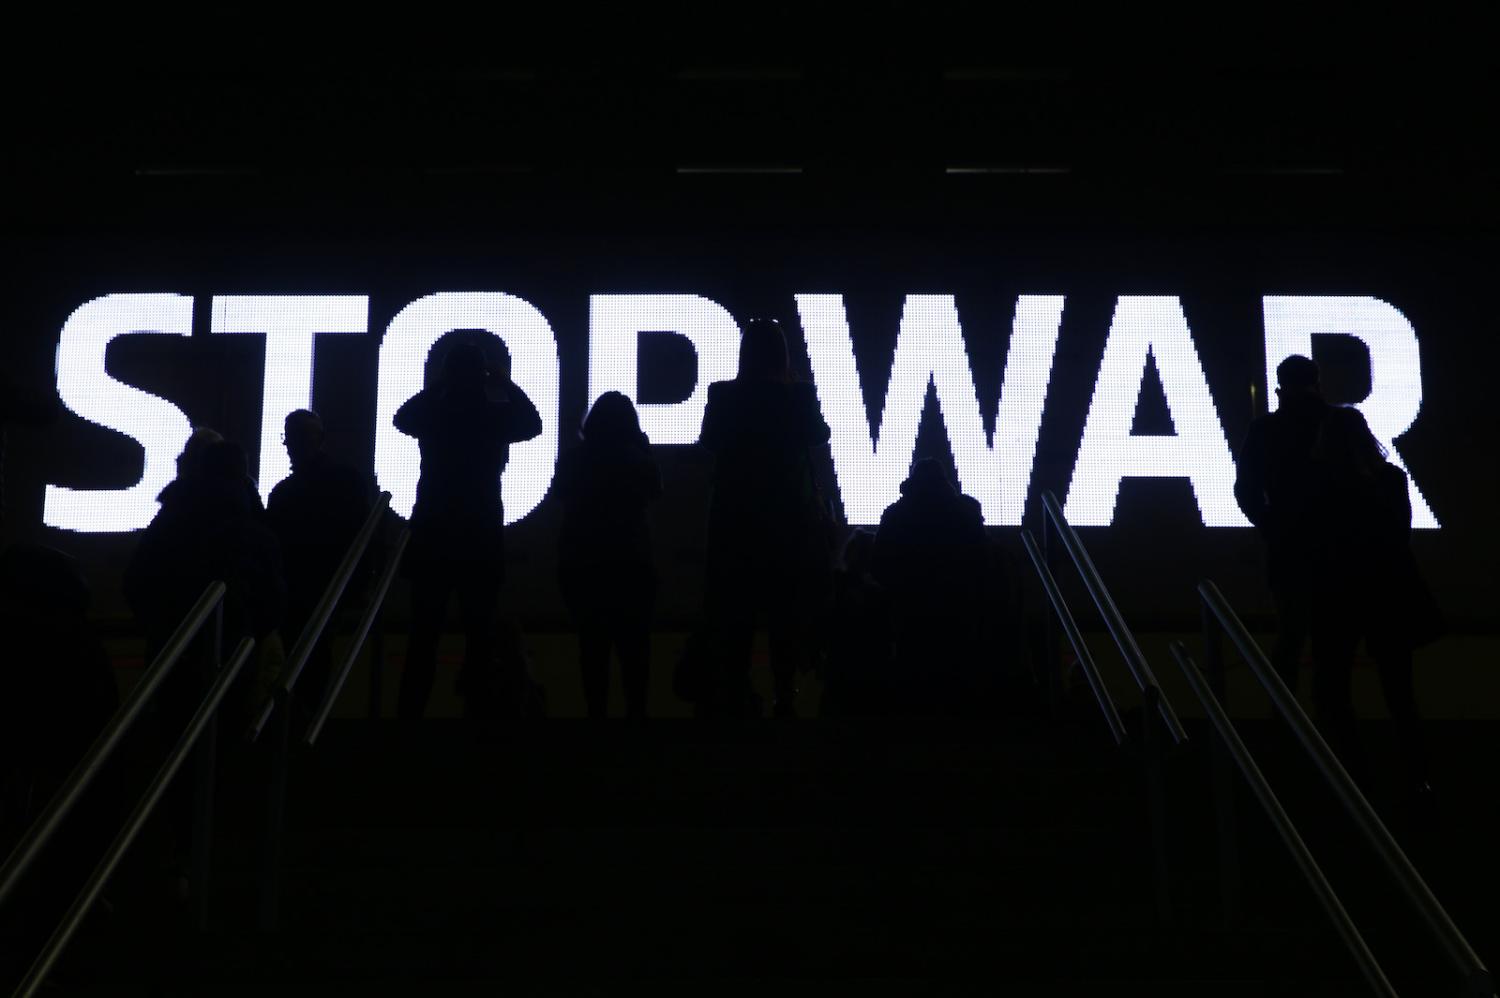 A protest message is displayed on a giant LED screen inside a football stadium in Madrid, Spain (Photo by Gonzalo Arroyo Moreno/Getty Images)